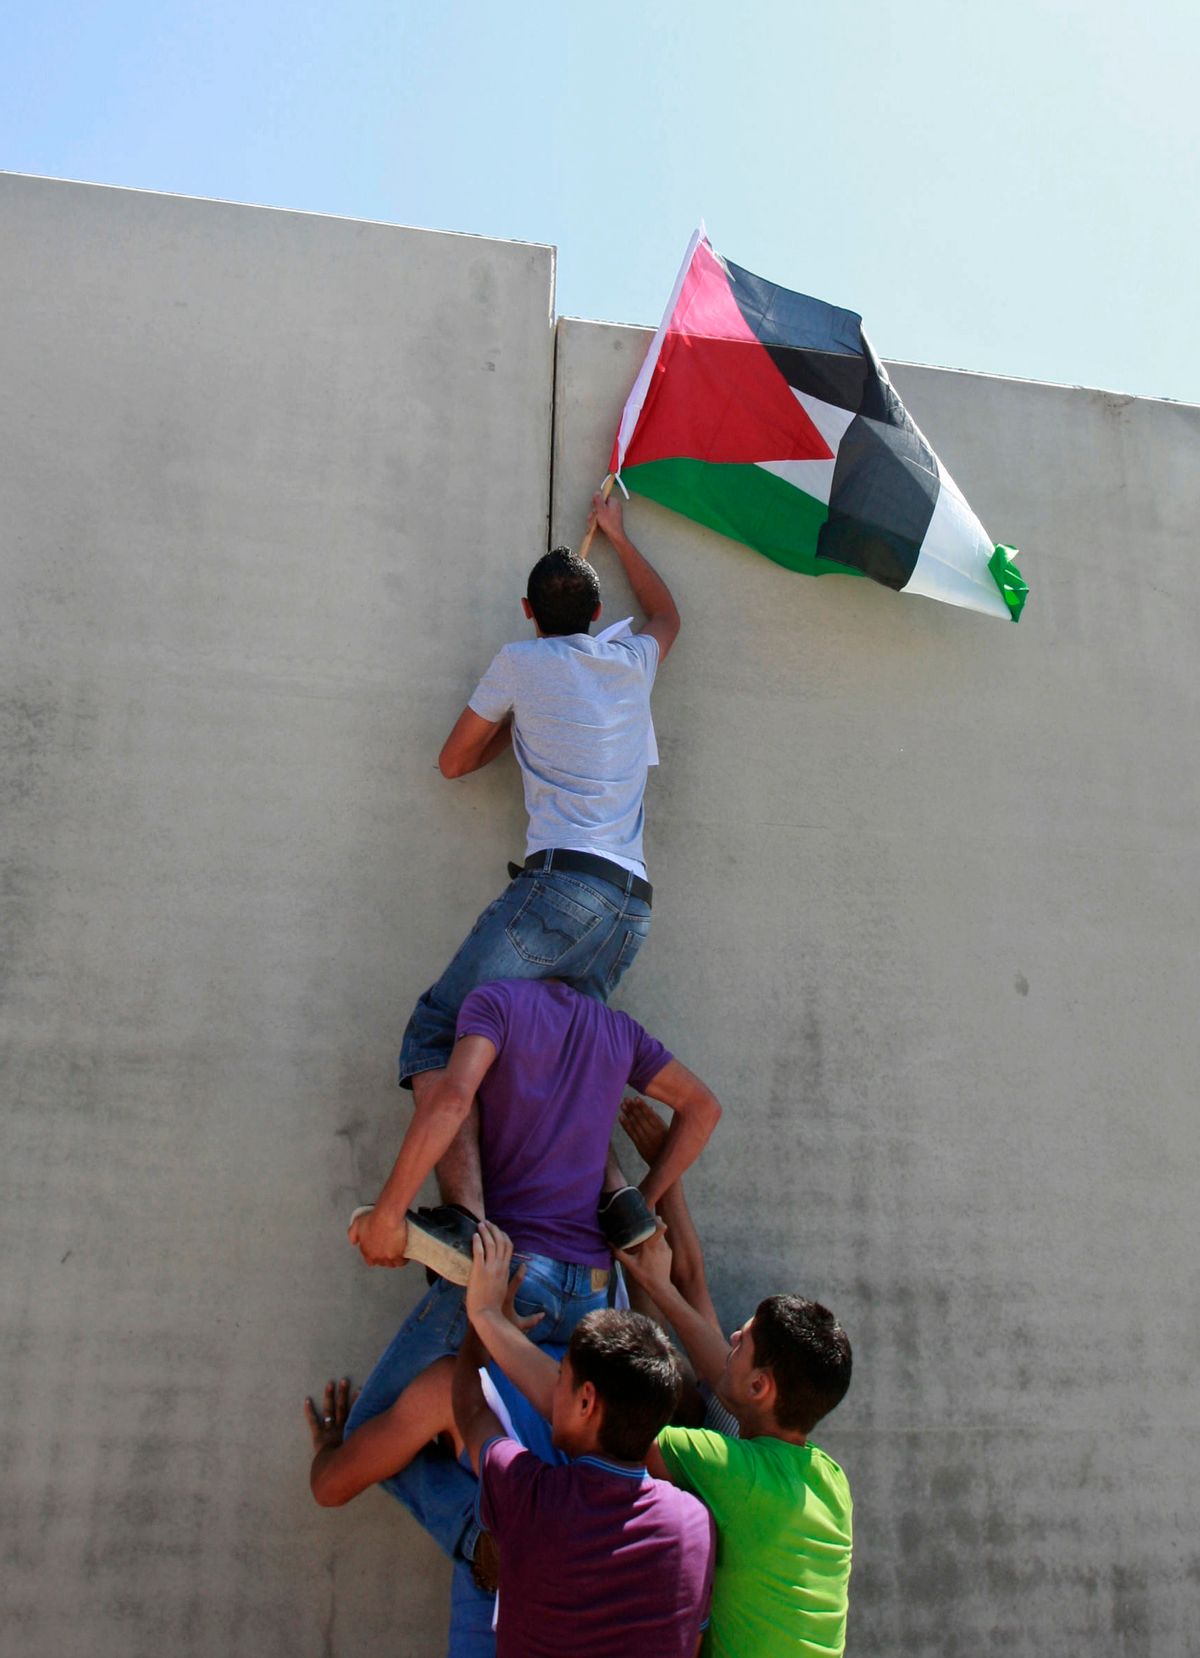 A Palestinian holding a national flag climbs the separation barrier during a protest against its construction in the West Bank village of Walajeh, outside Jerusalem. Friday, Sept. 16, 2011. (AP Photo/Nasser Shiyoukhi) (Associated Press)